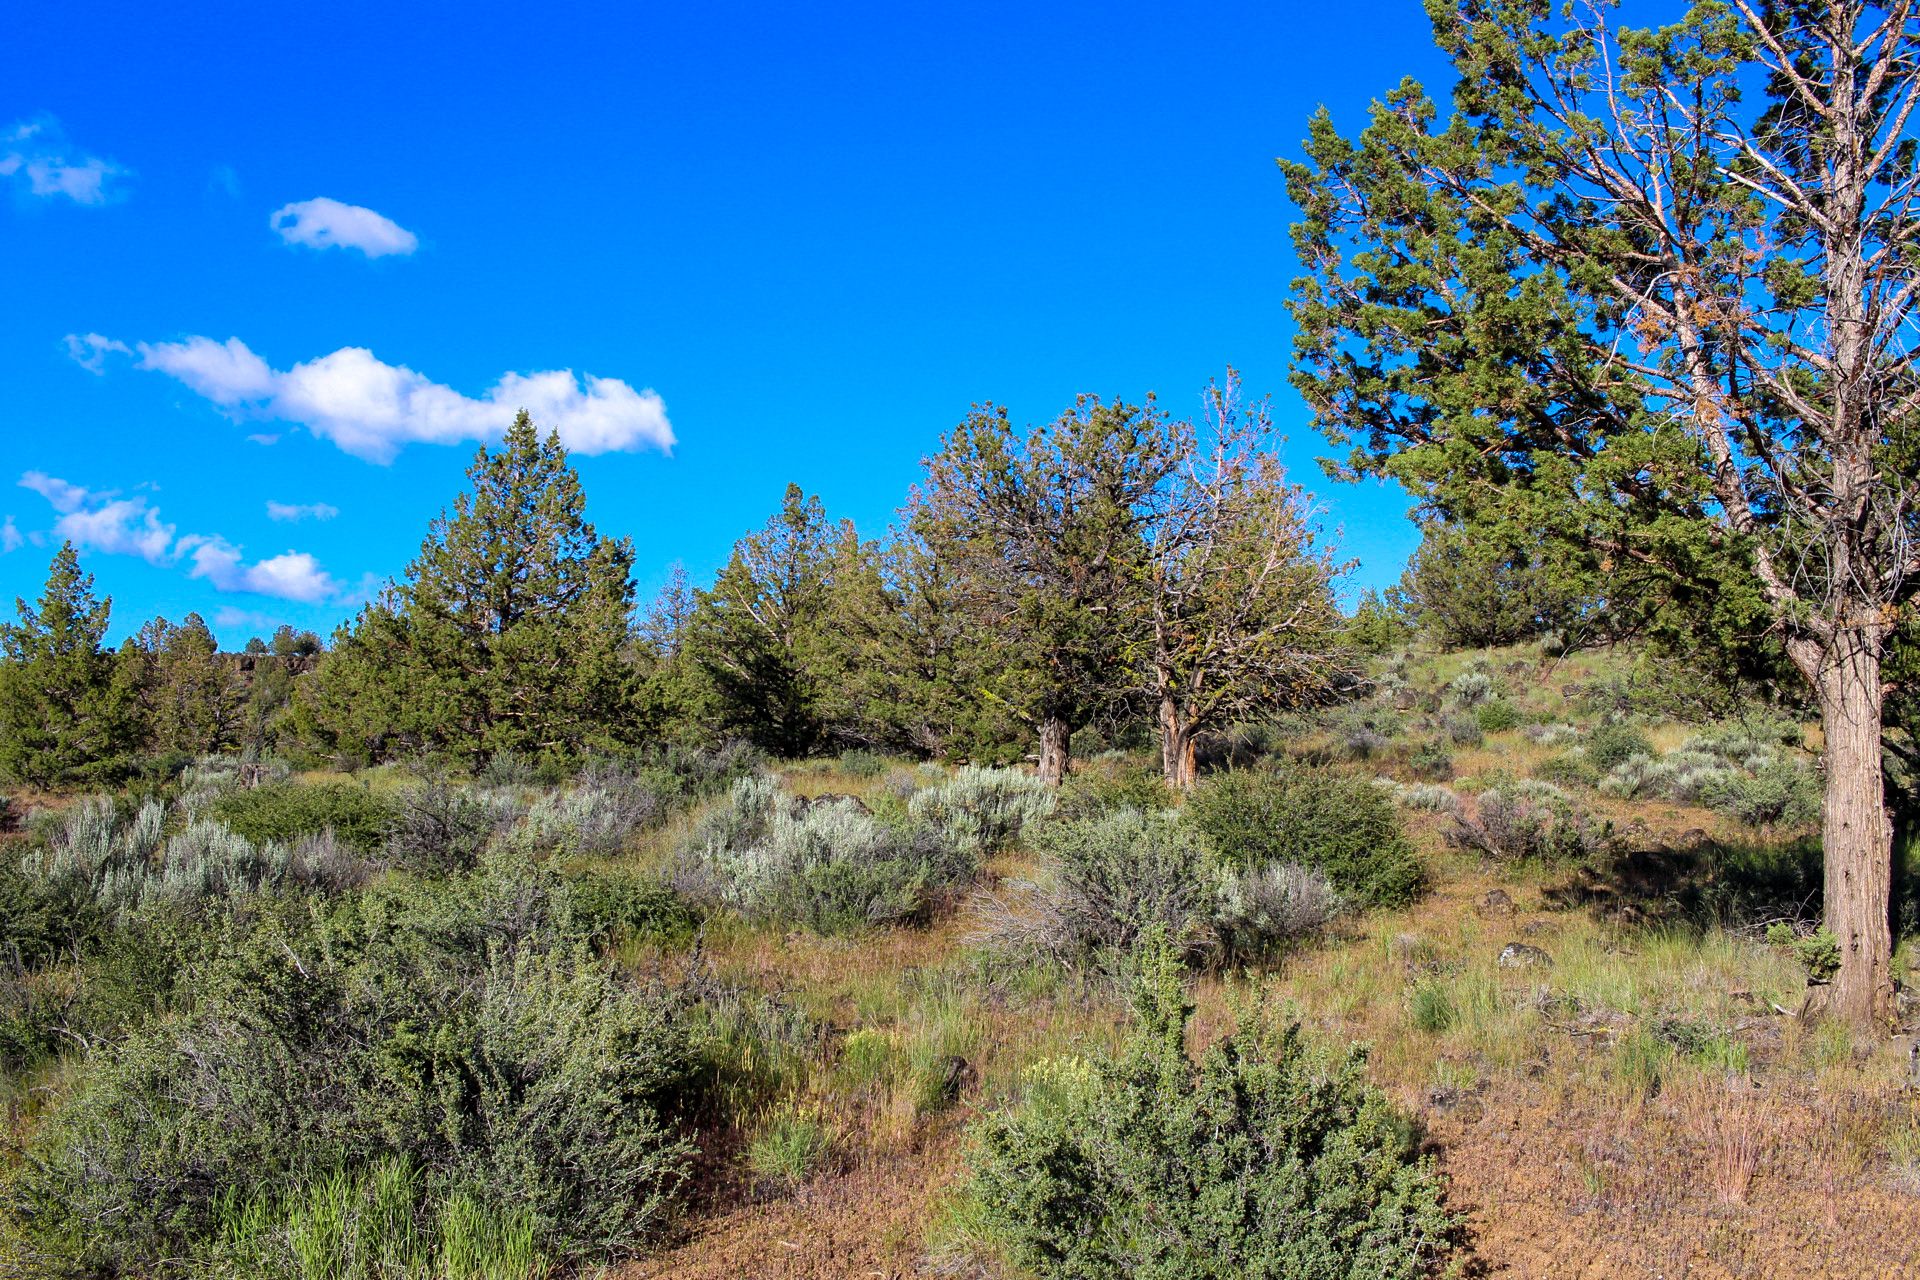 Camp or Build Your Getaway in Peaceful & Uncrowded California Pines, Modoc County, California!